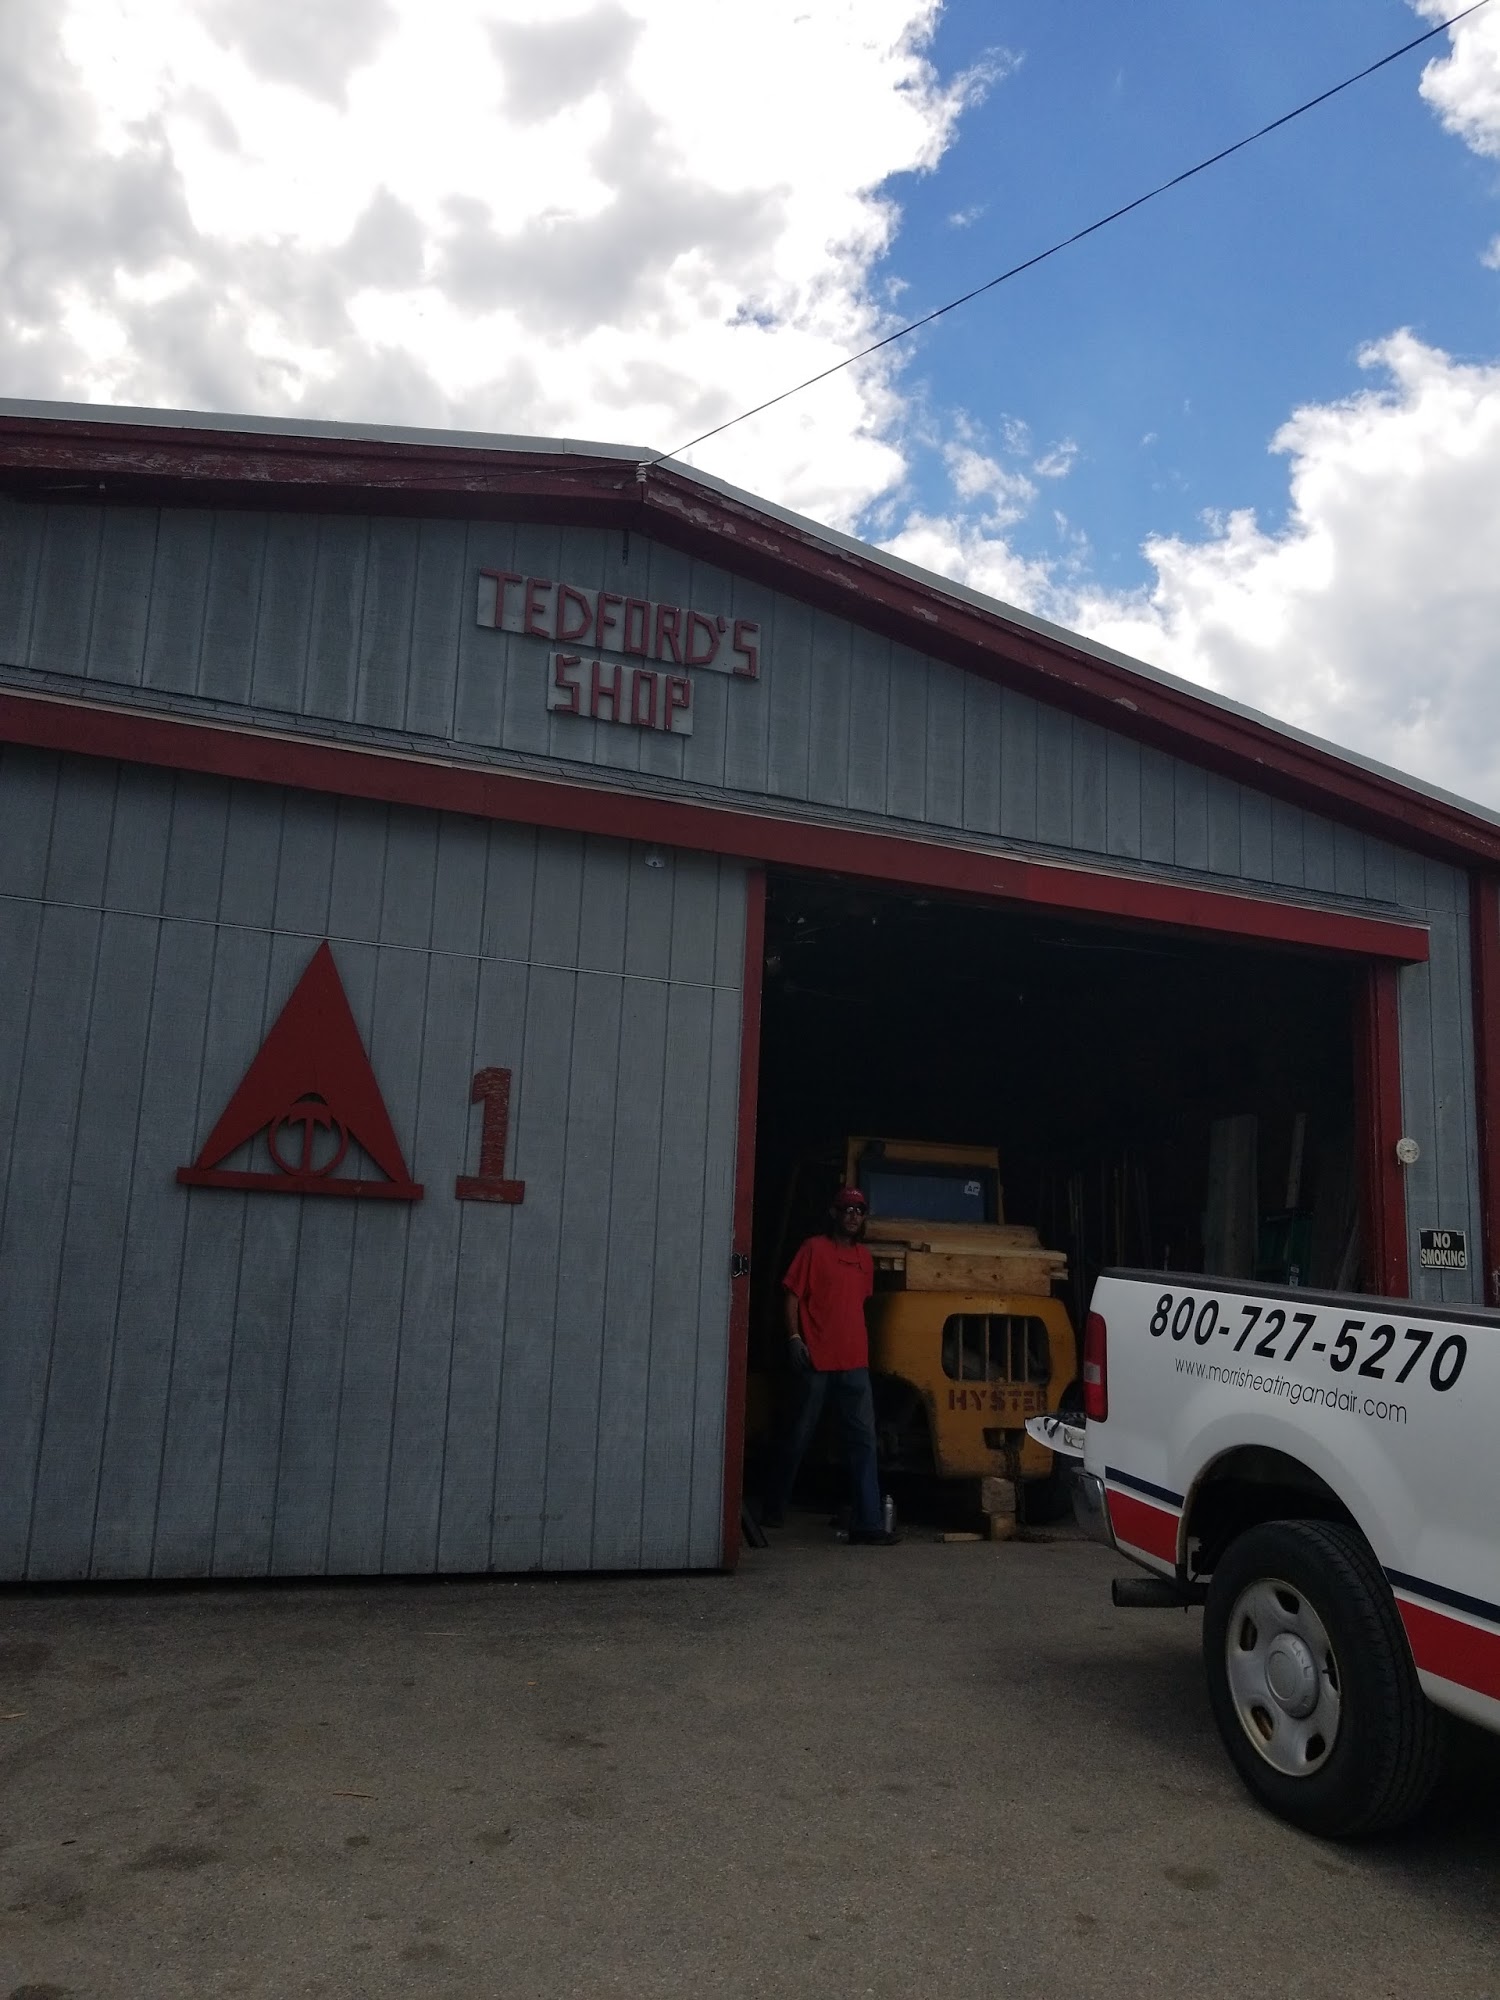 Tedford's Building Materials And Hardware